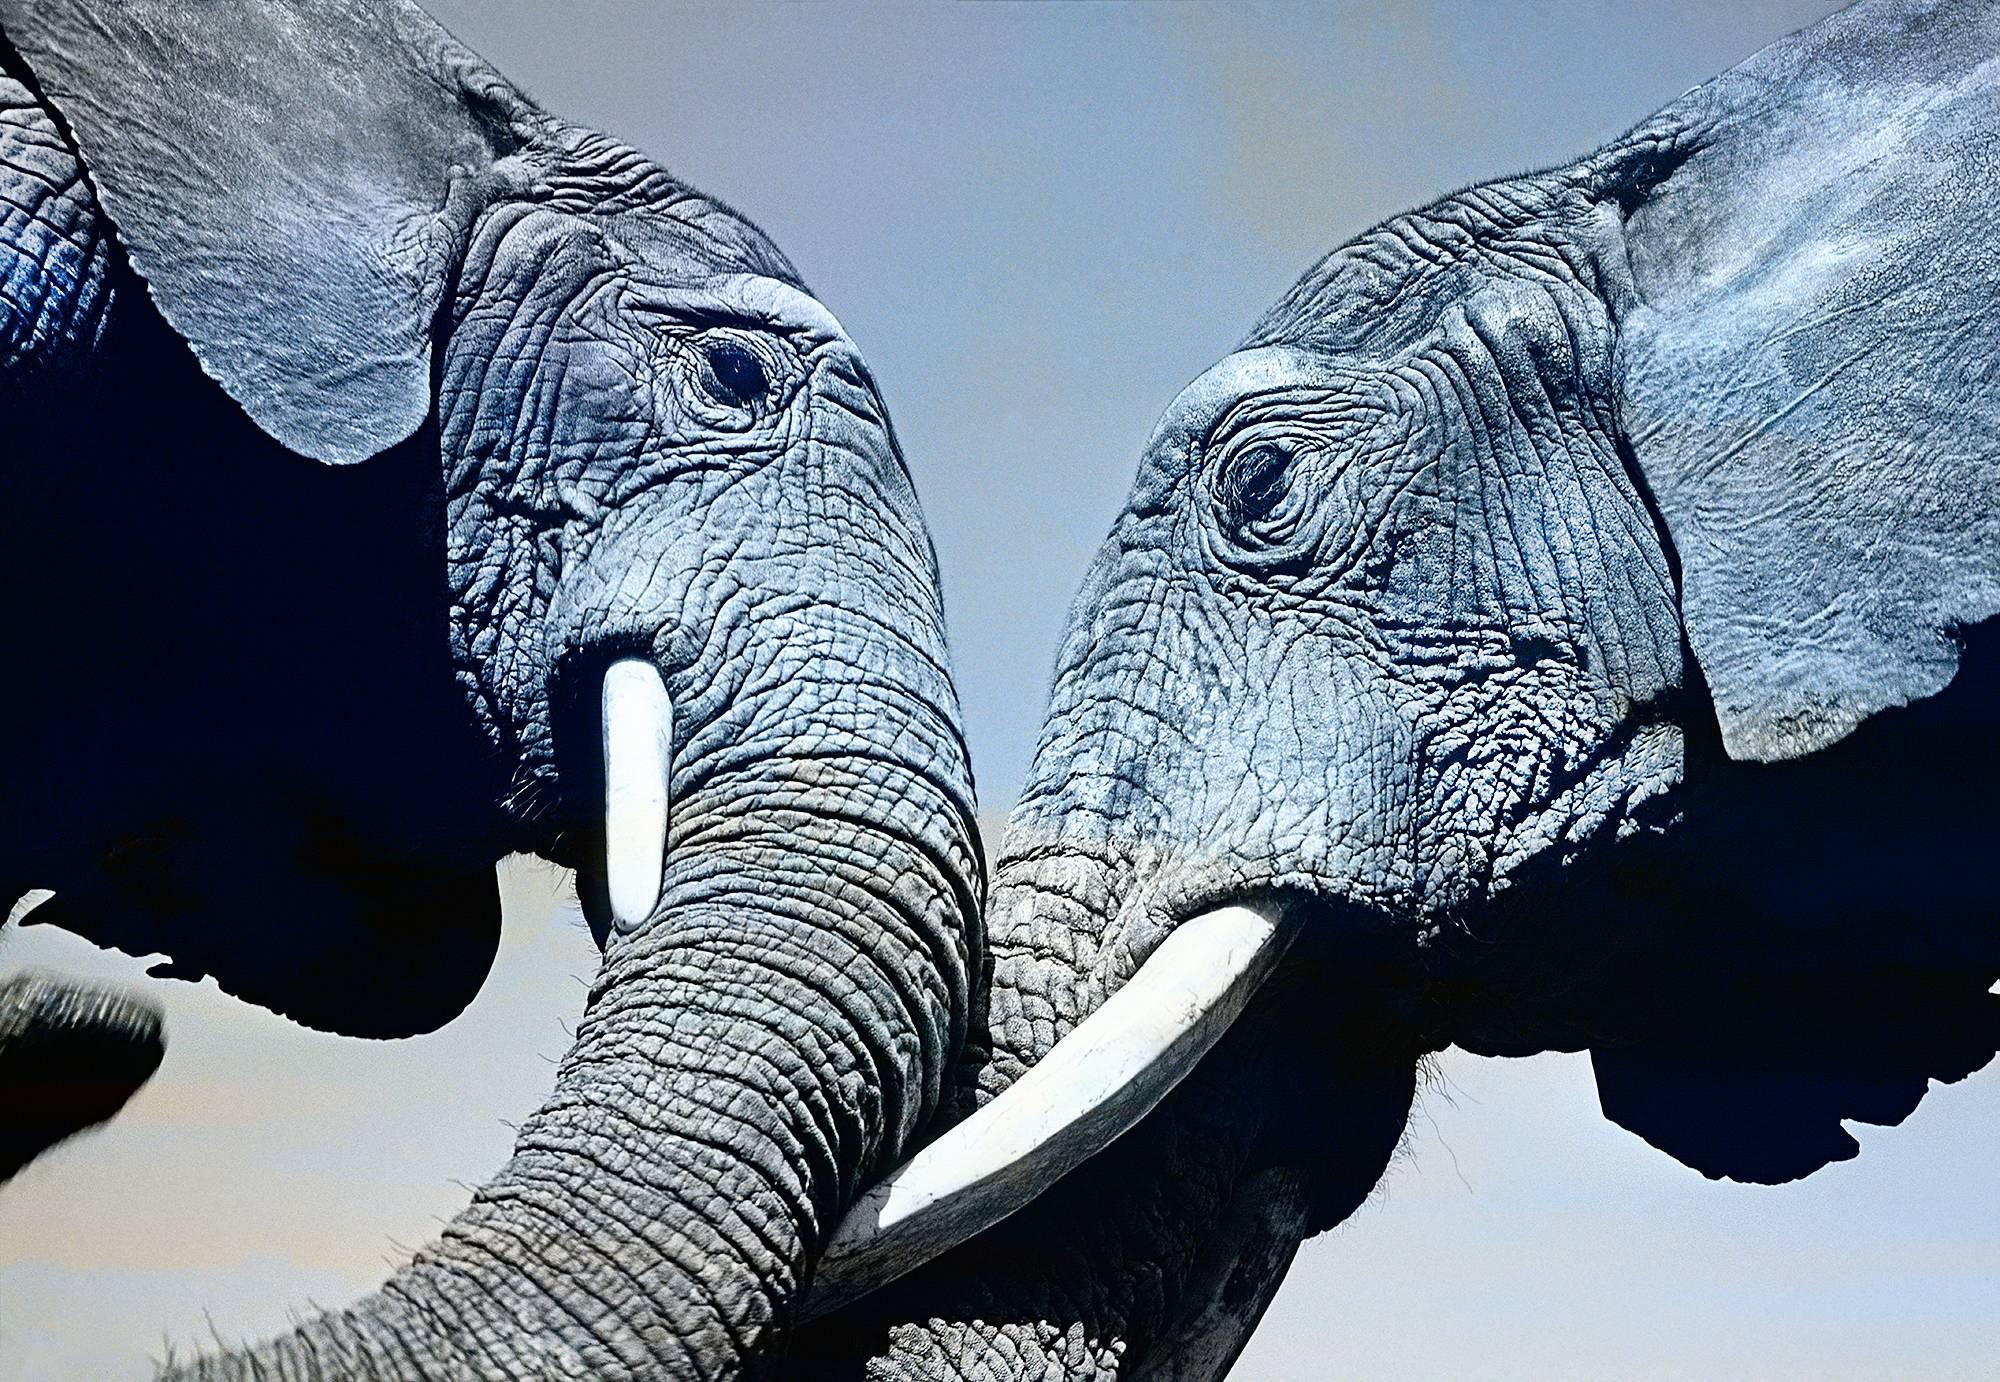 Mitchell Funk Figurative Photograph - Elephants with tusks in Mexico, Life Magazine